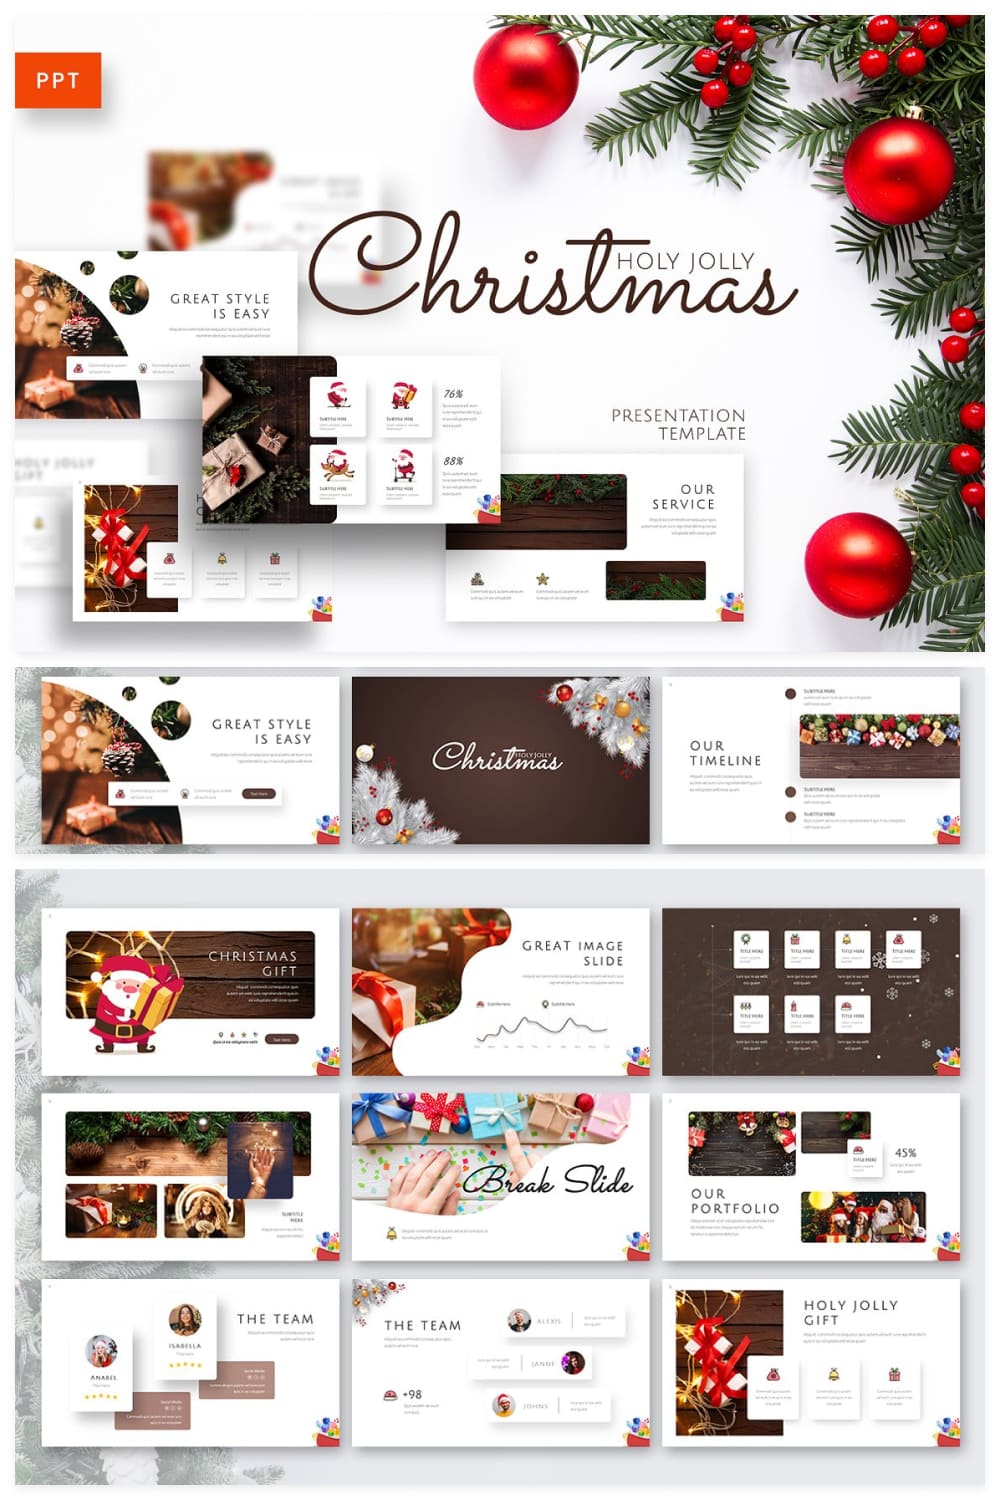 01 Holy Joly Christmas Template by MasterBundles Pinterest Collage Image.